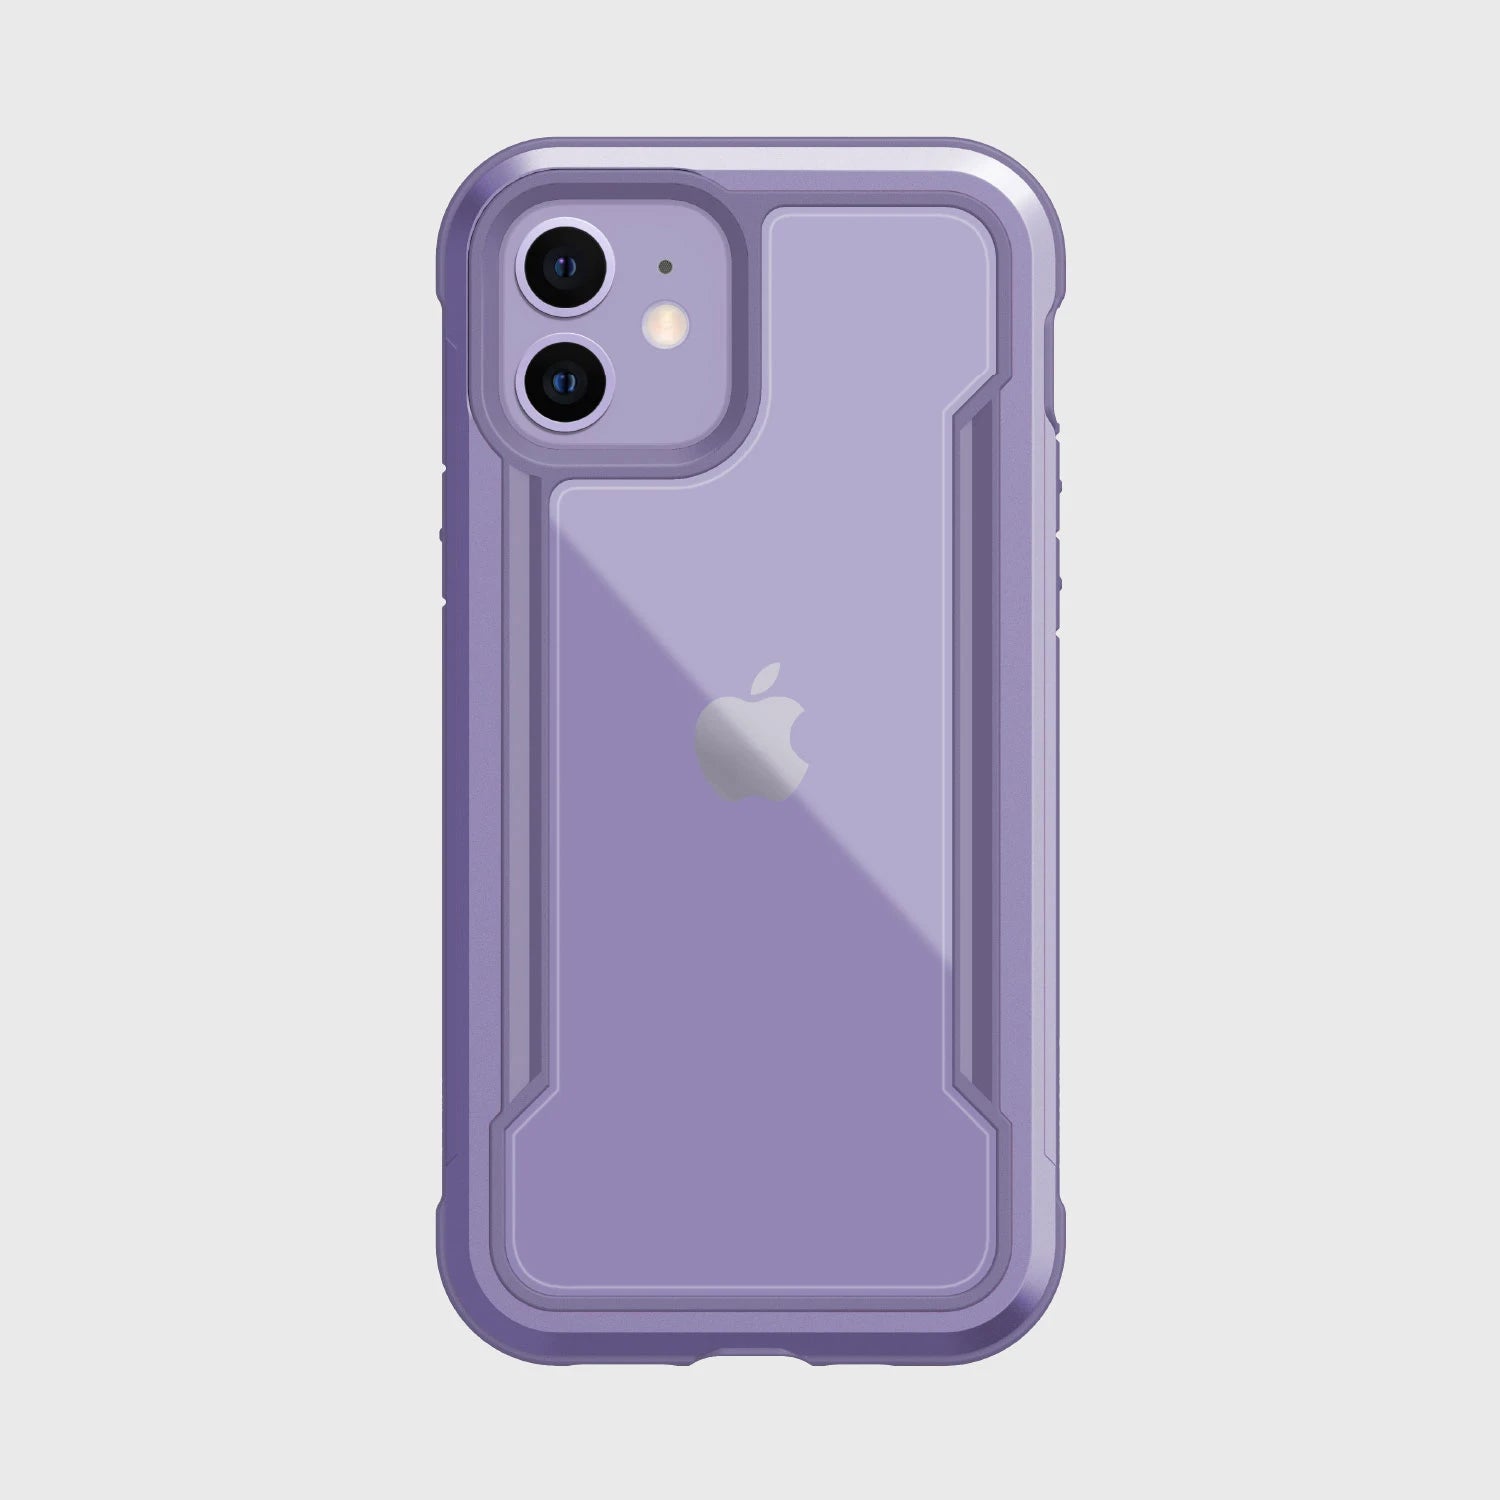 A purple Raptic SHIELD case for iPhone 12 Pro Max with a 13' foot drop protection on a white background.